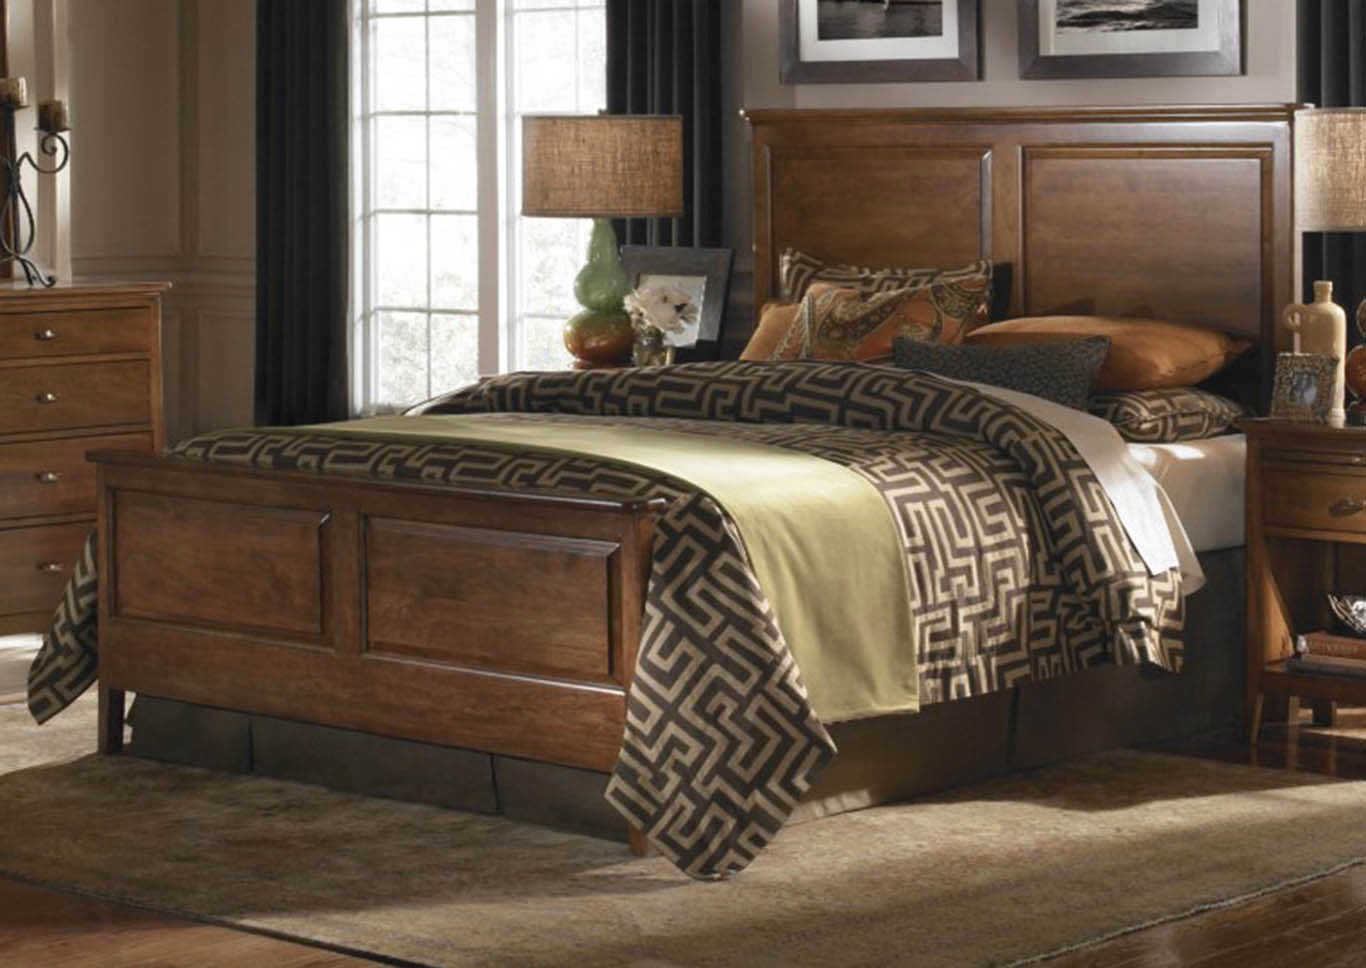 Cherry Park Natural Cherry King Panel Bed,Kincaid